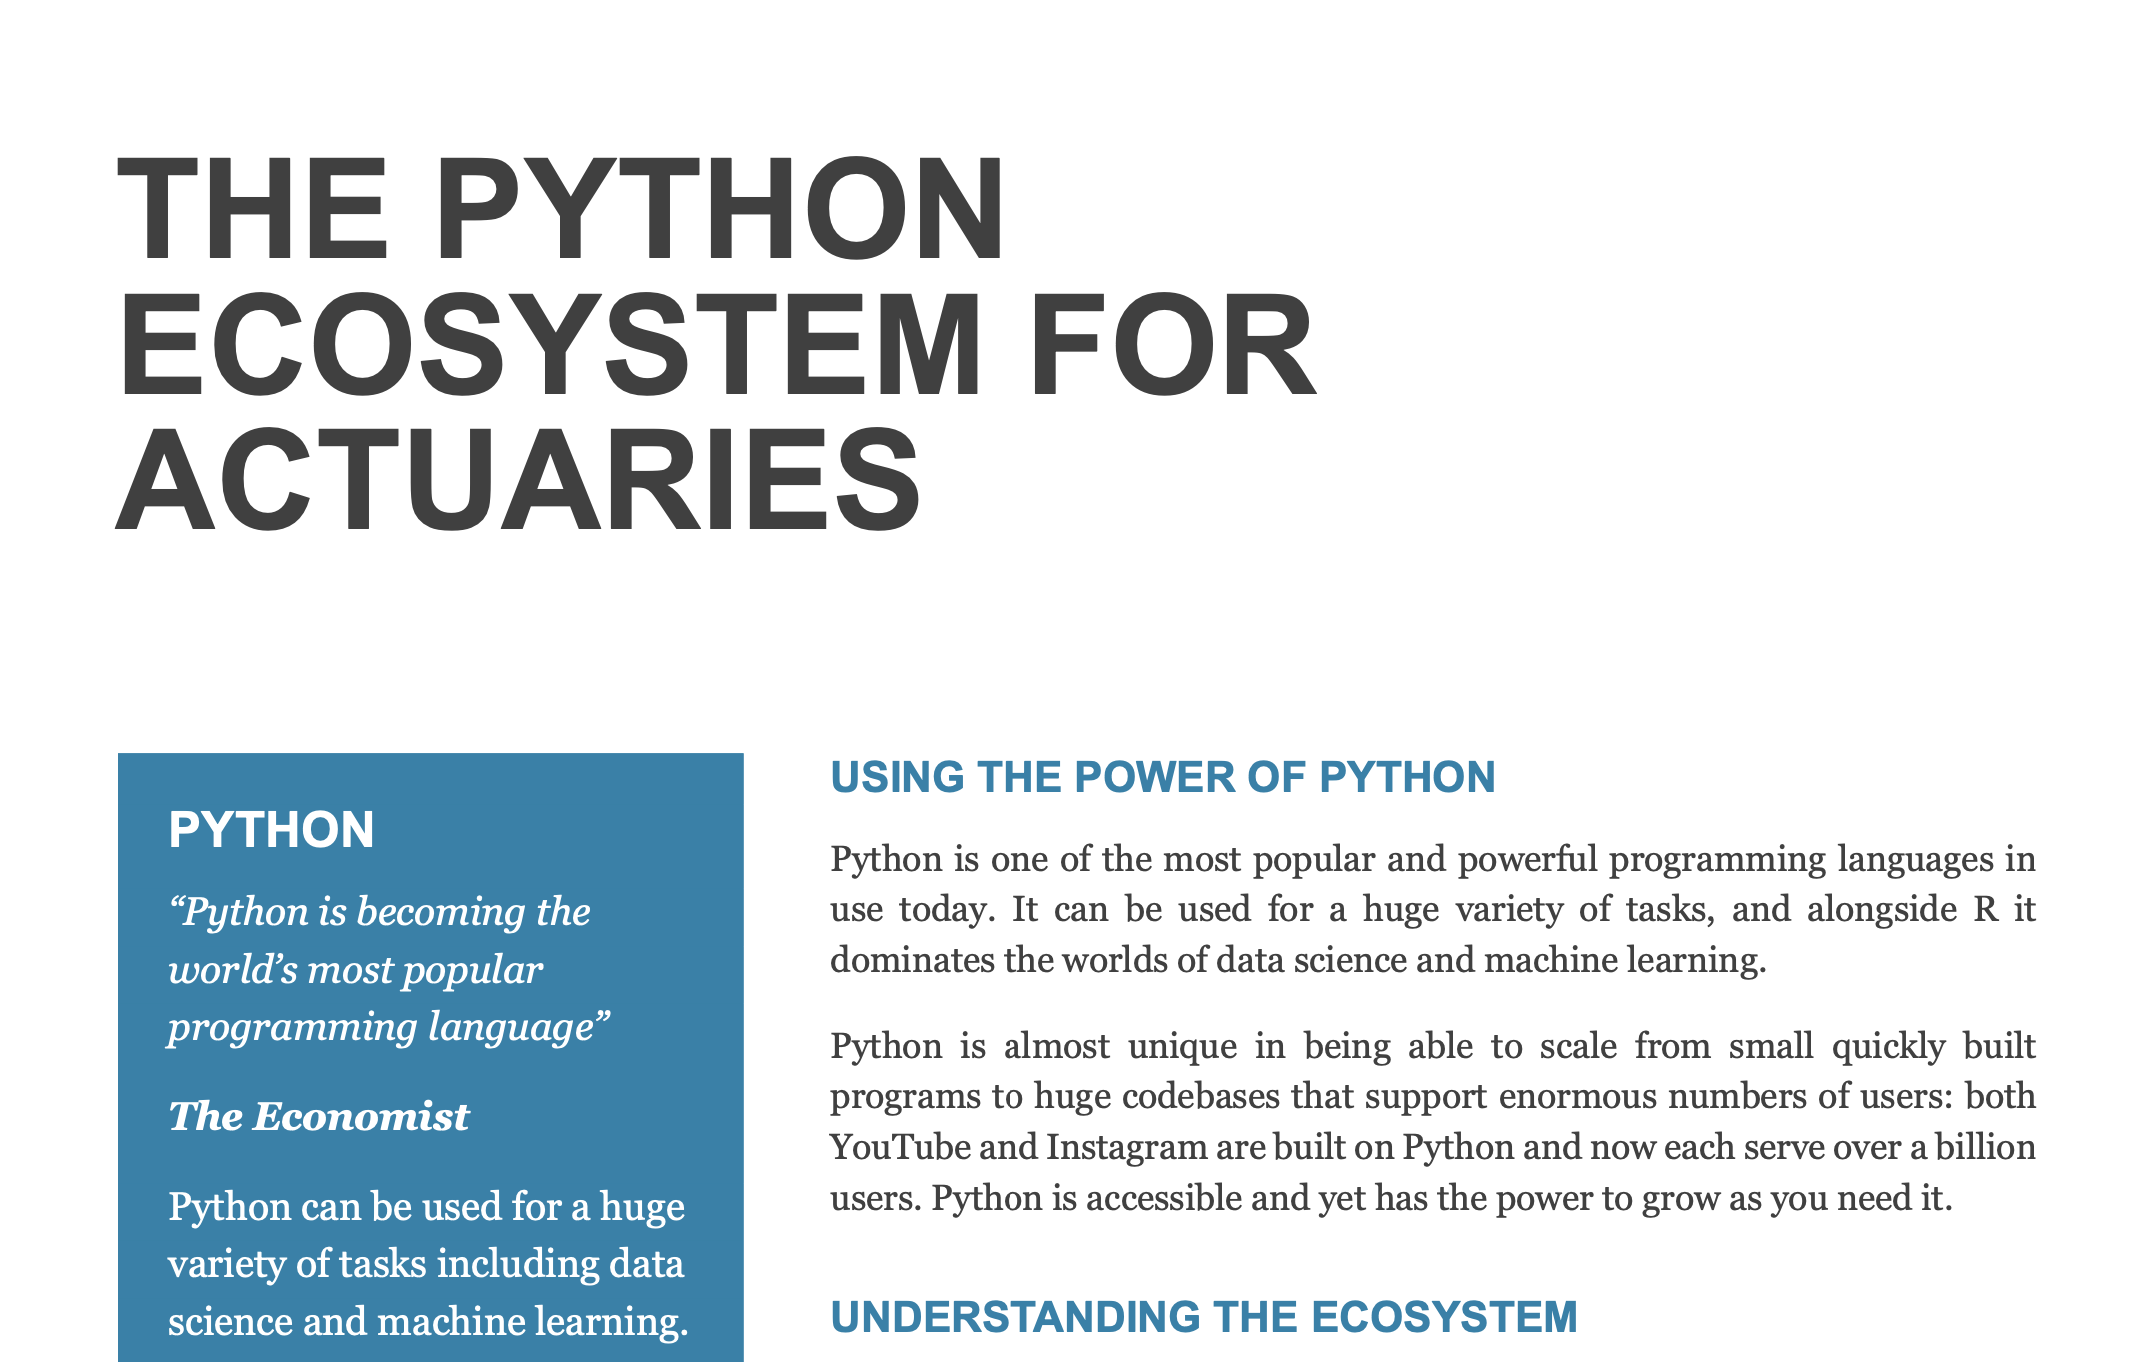 Python Ecosystem for Actuaries